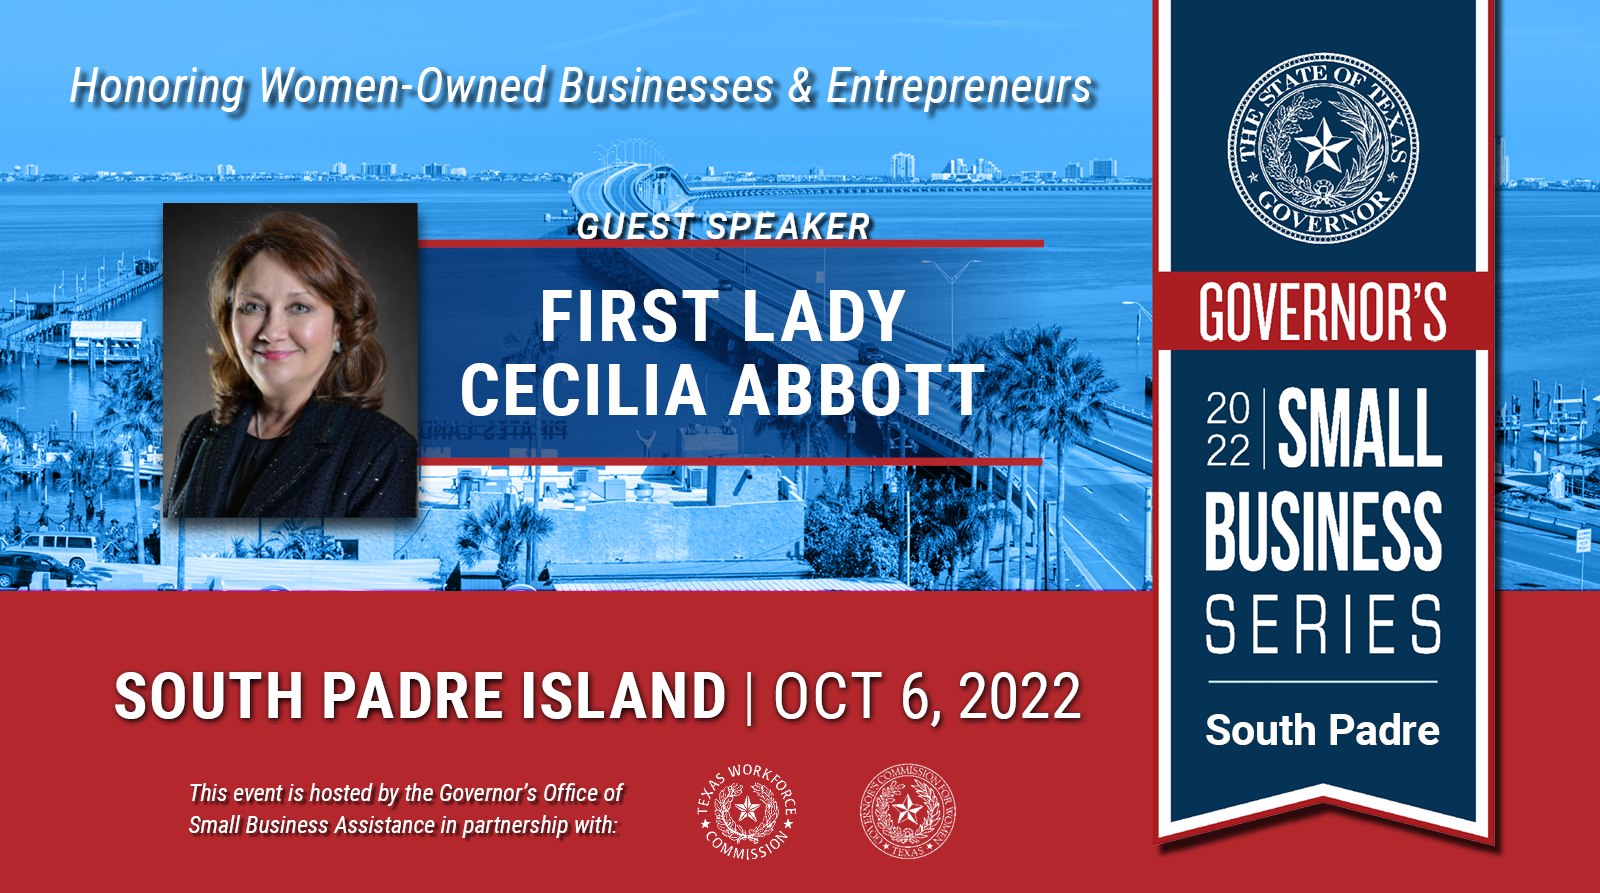 Governor Abbott Announces Governor’s Small Business Series - South Padre Island